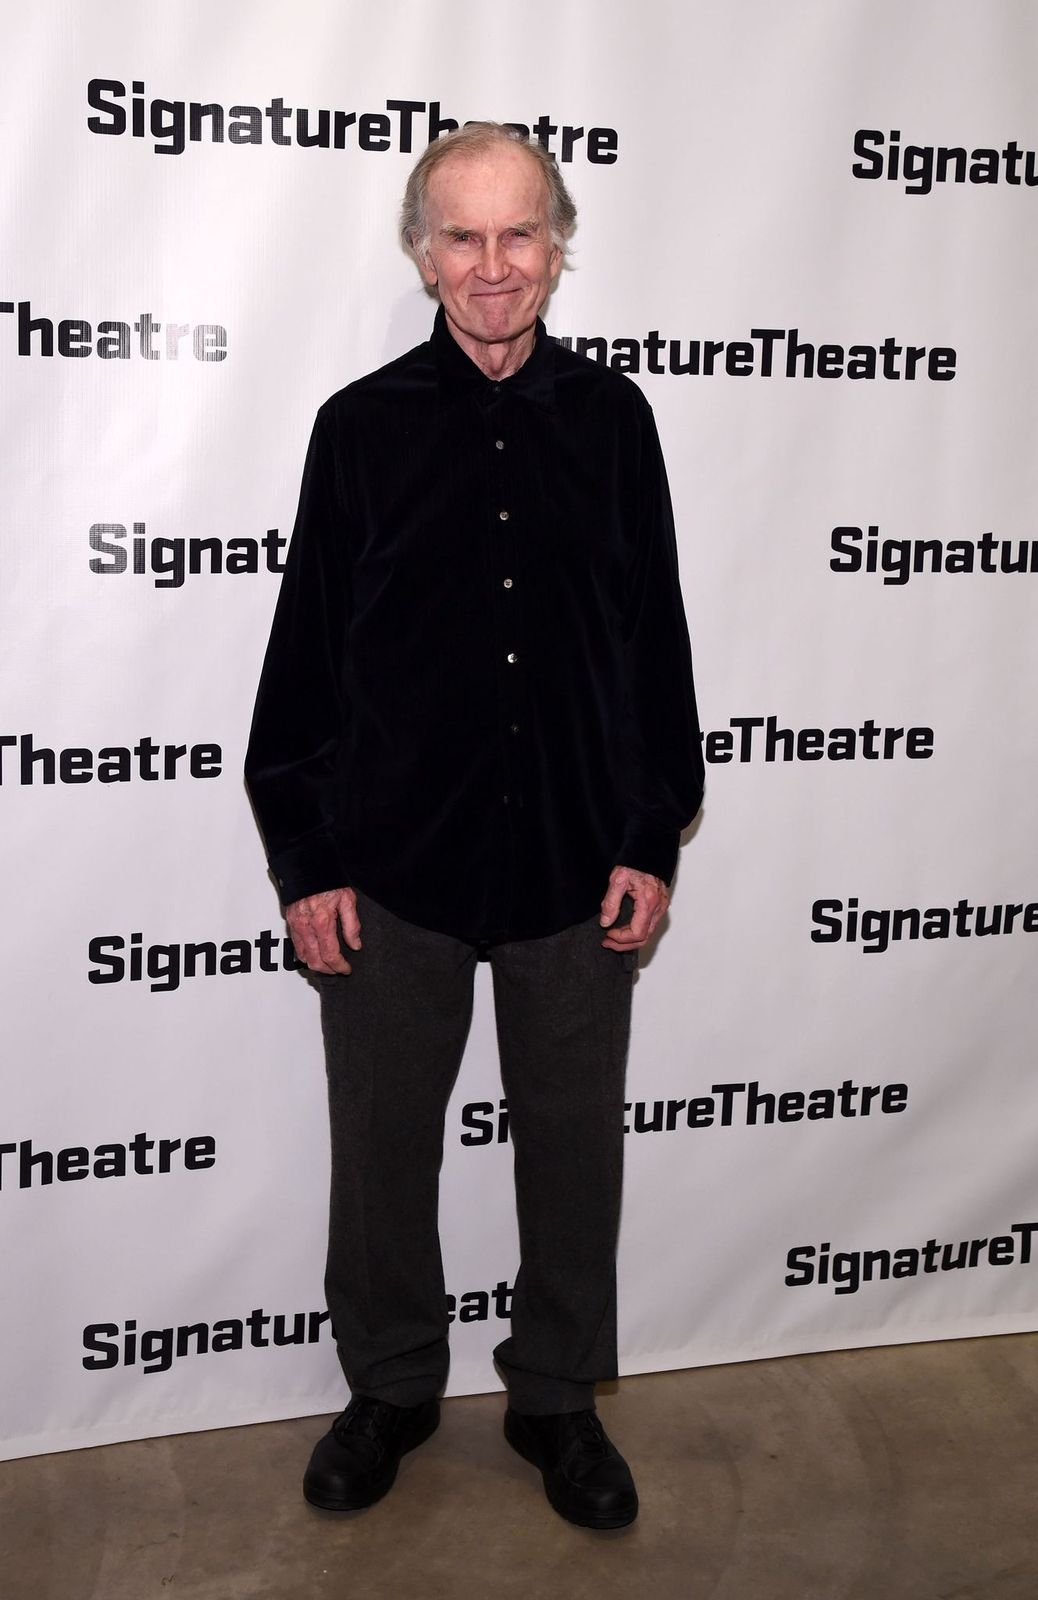 Robert Hogan at "The Liquid Plane" opening night party at The Pershing Square Signature Center on March 8, 2015, in New York City | Photo: Ilya S. Savenok/Getty Images